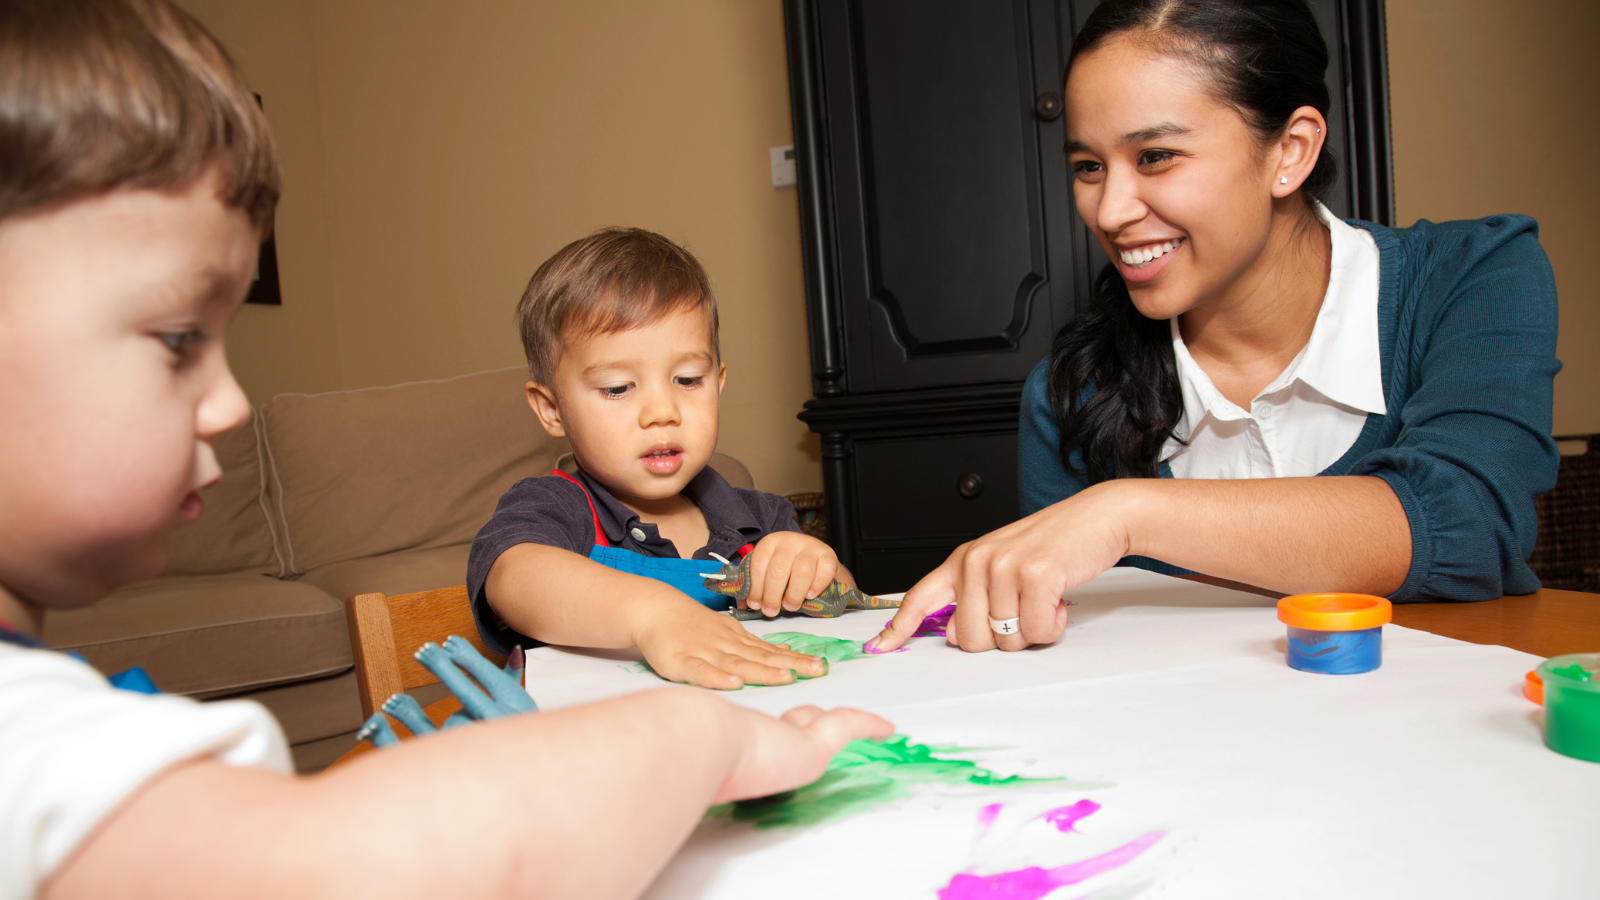 childcare worker showing two children how to fingerpaint